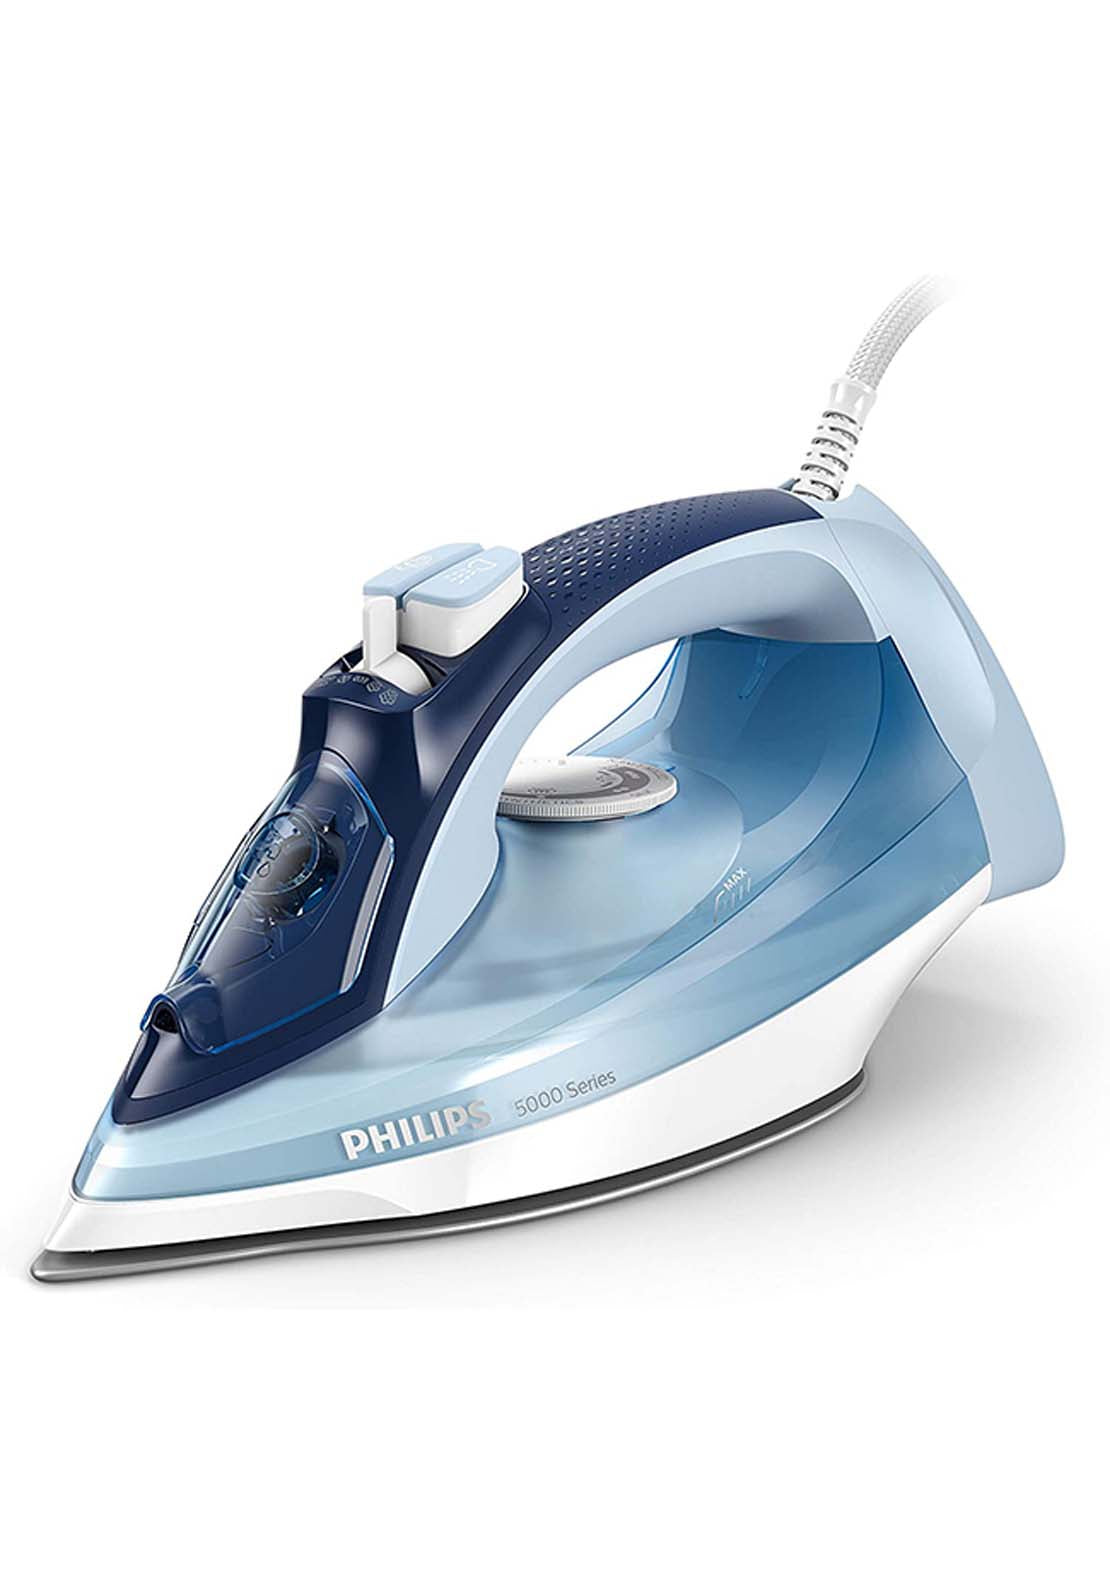 Philips Serie Steam Iron | Dst503026 5000 1 Shaws Department Stores